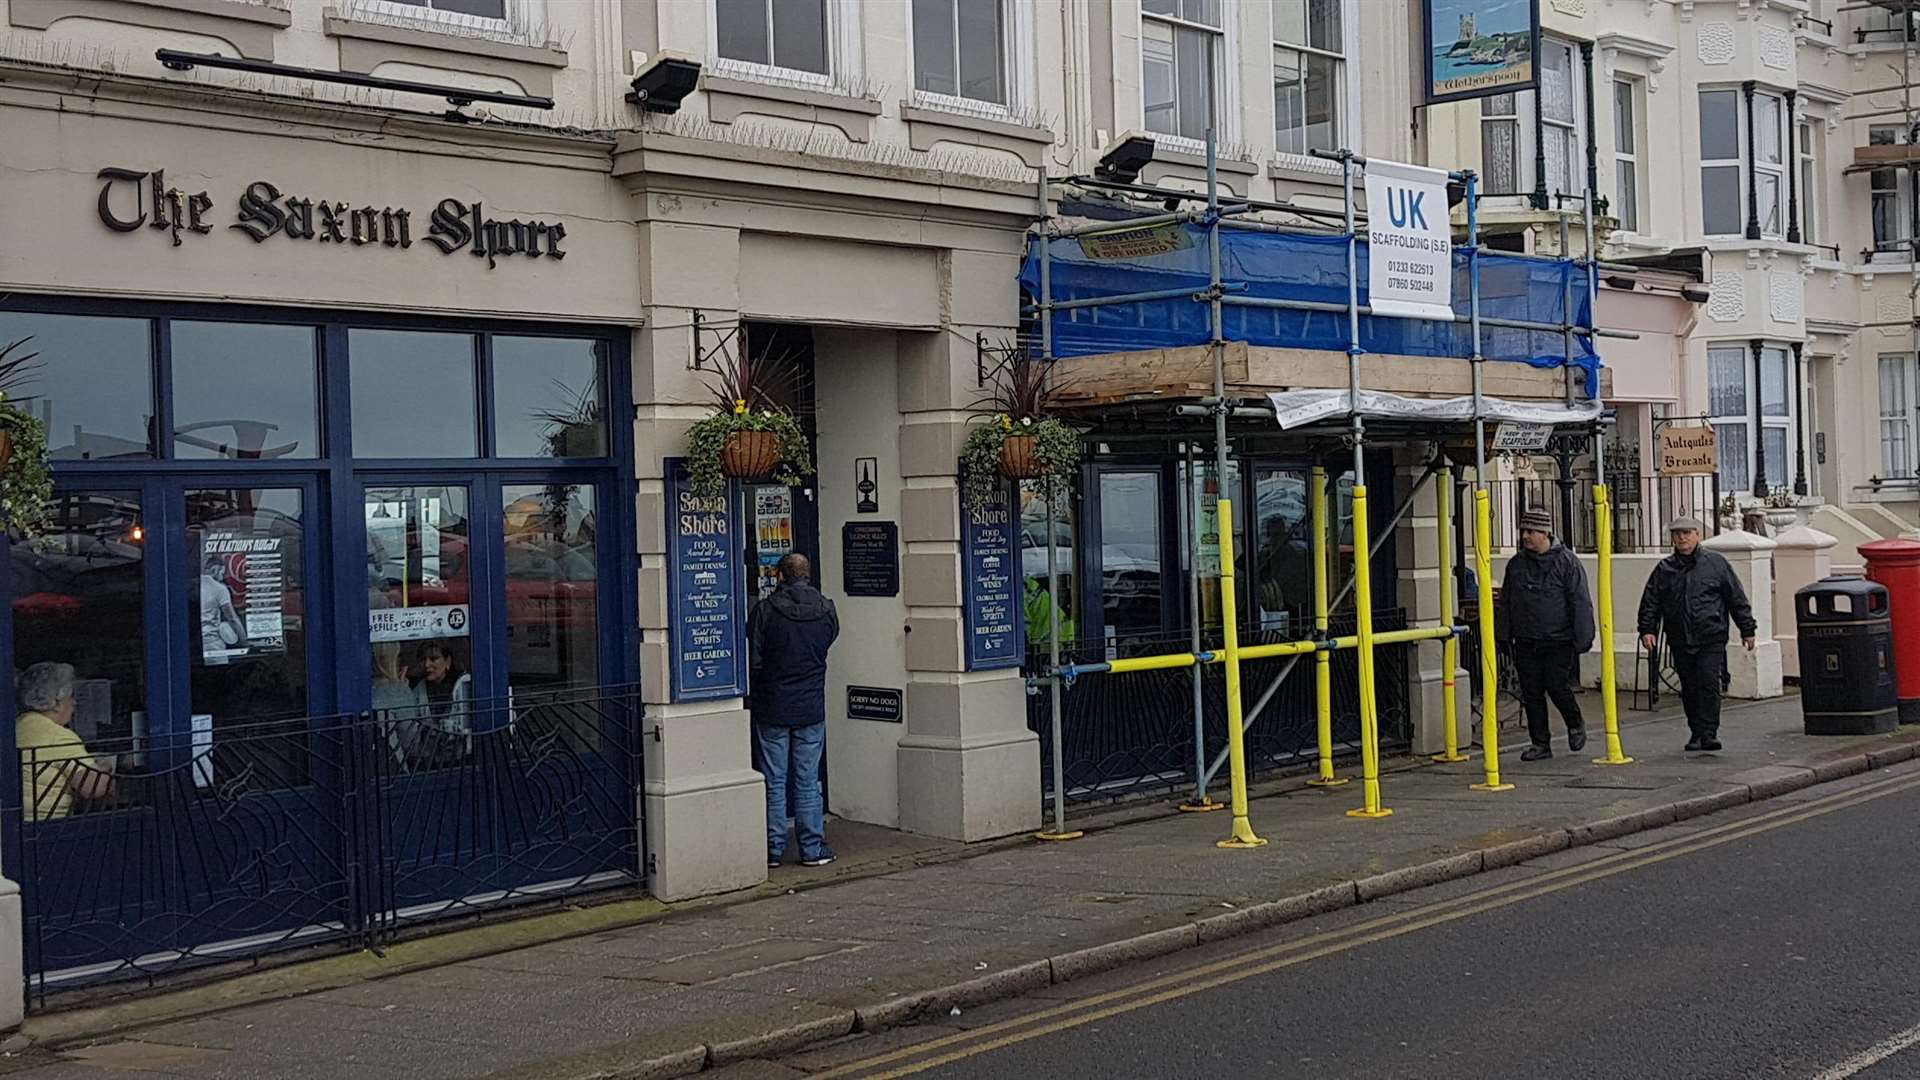 Man stabbed at Wetherspoons The Saxon Shore pub on Central Parade in Herne image pic photo